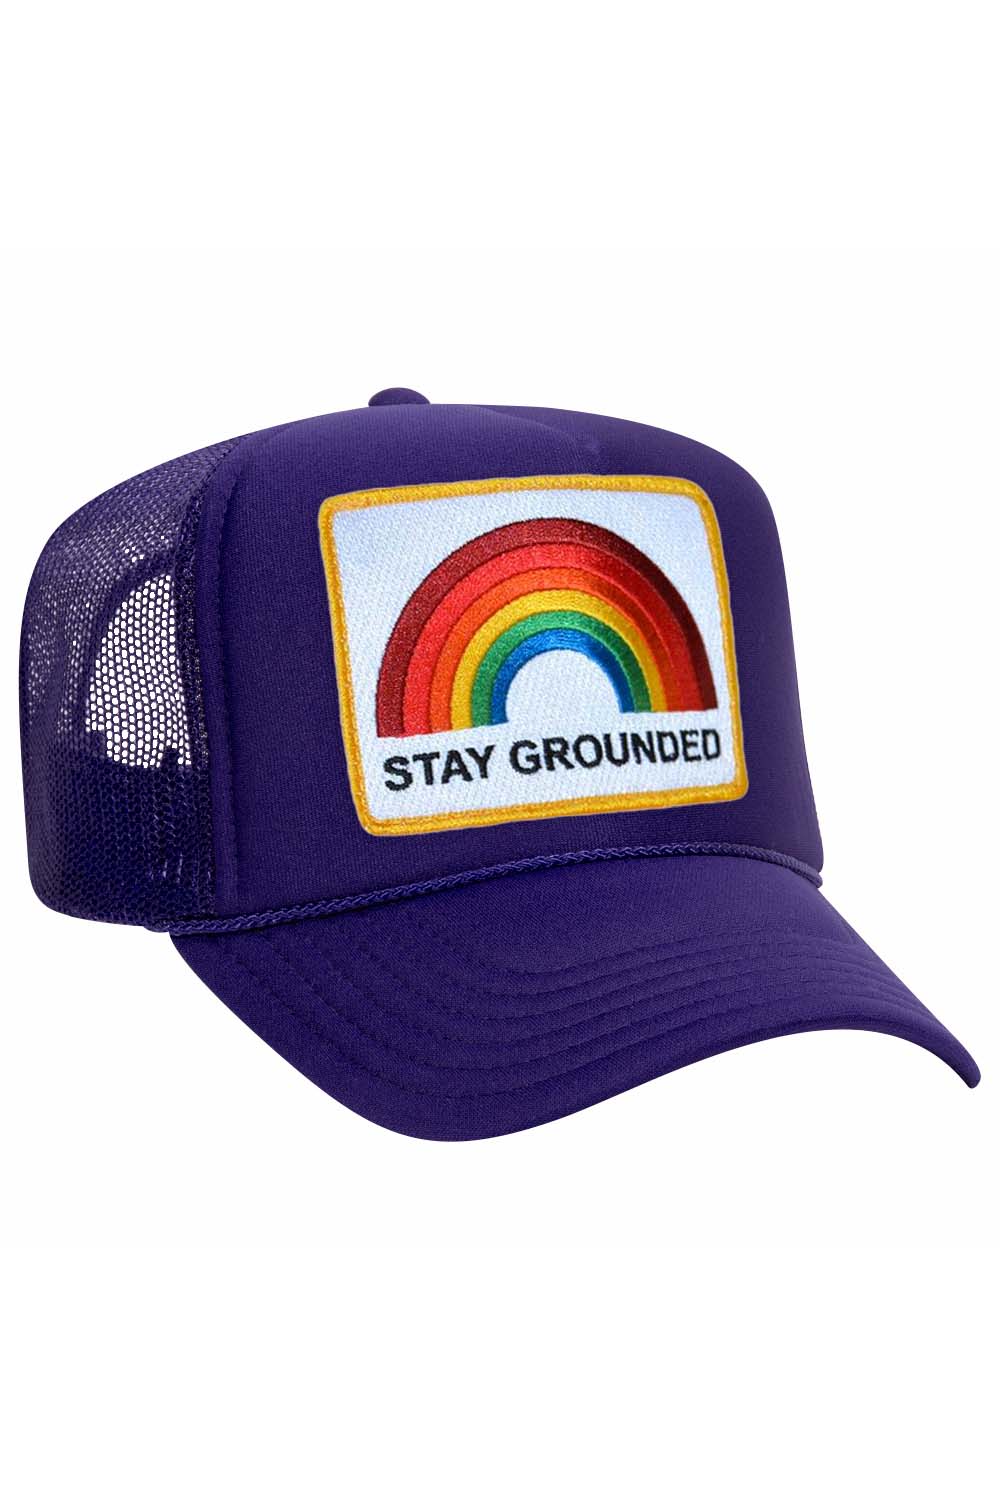 STAY GROUNDED TRUCKER HAT HATS Aviator Nation PURPLE OS 